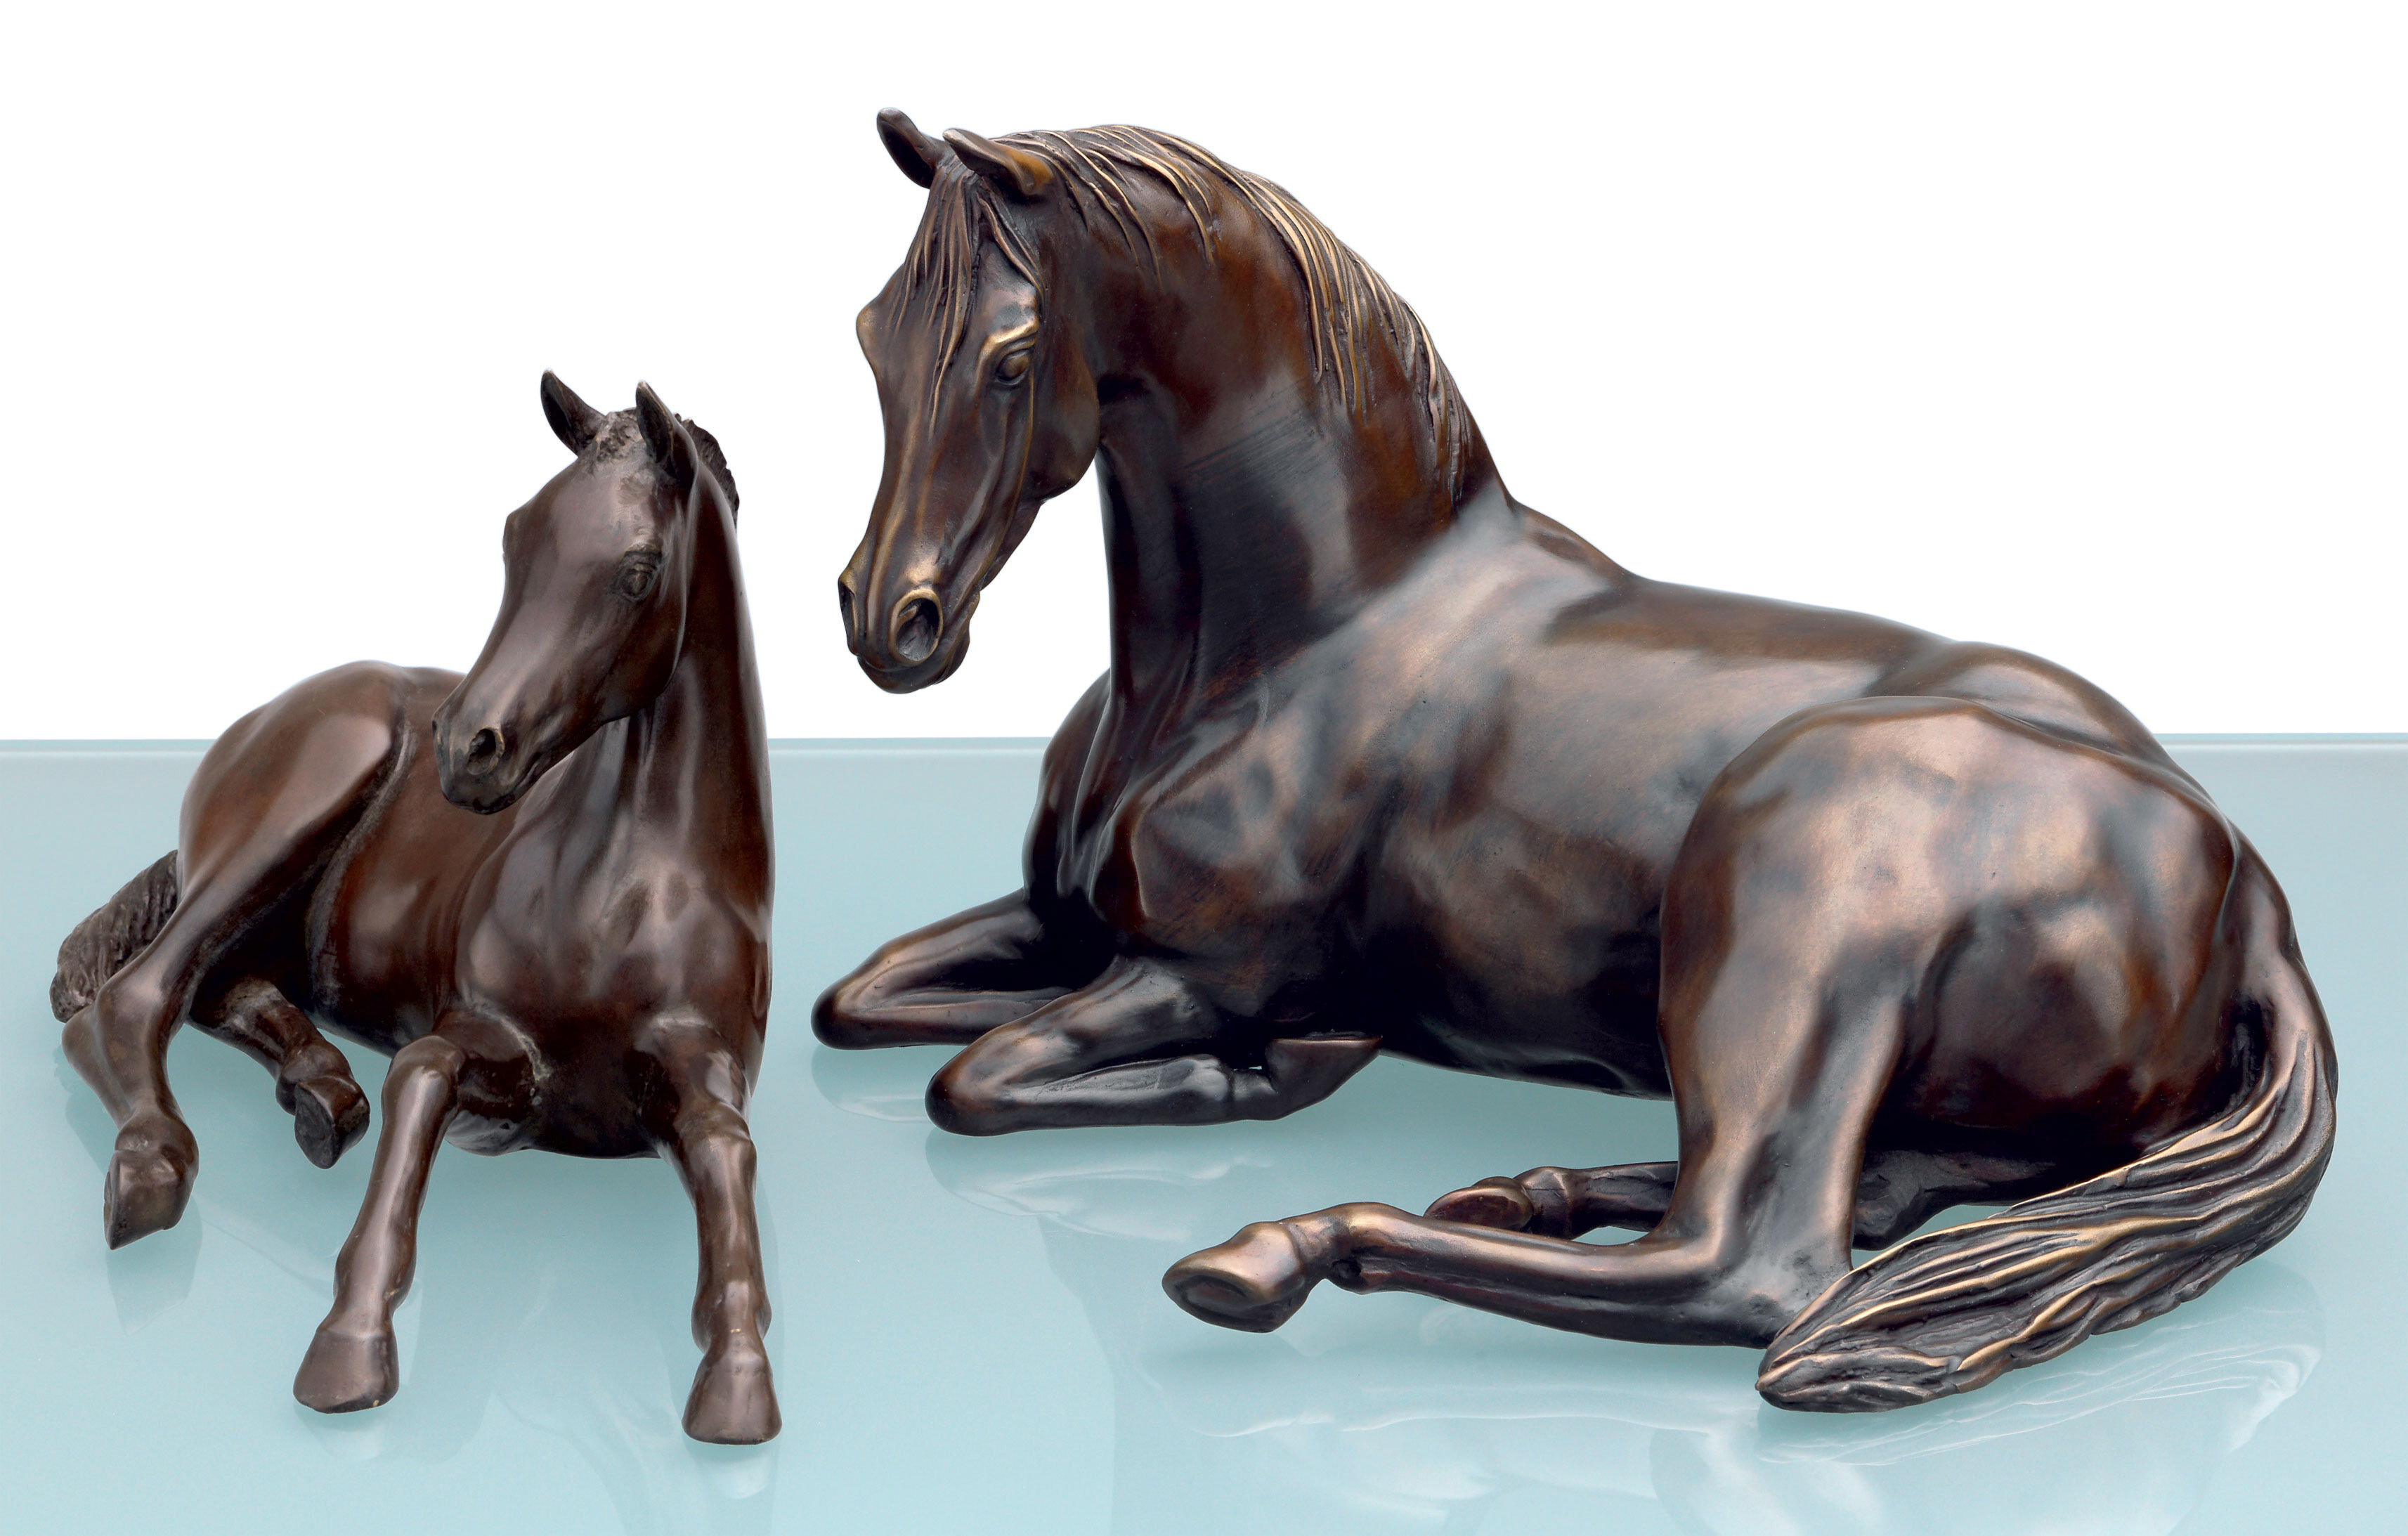 Set of 2 horse sculptures "Arabian Mare with Foal", bronze by Annette Diekemper